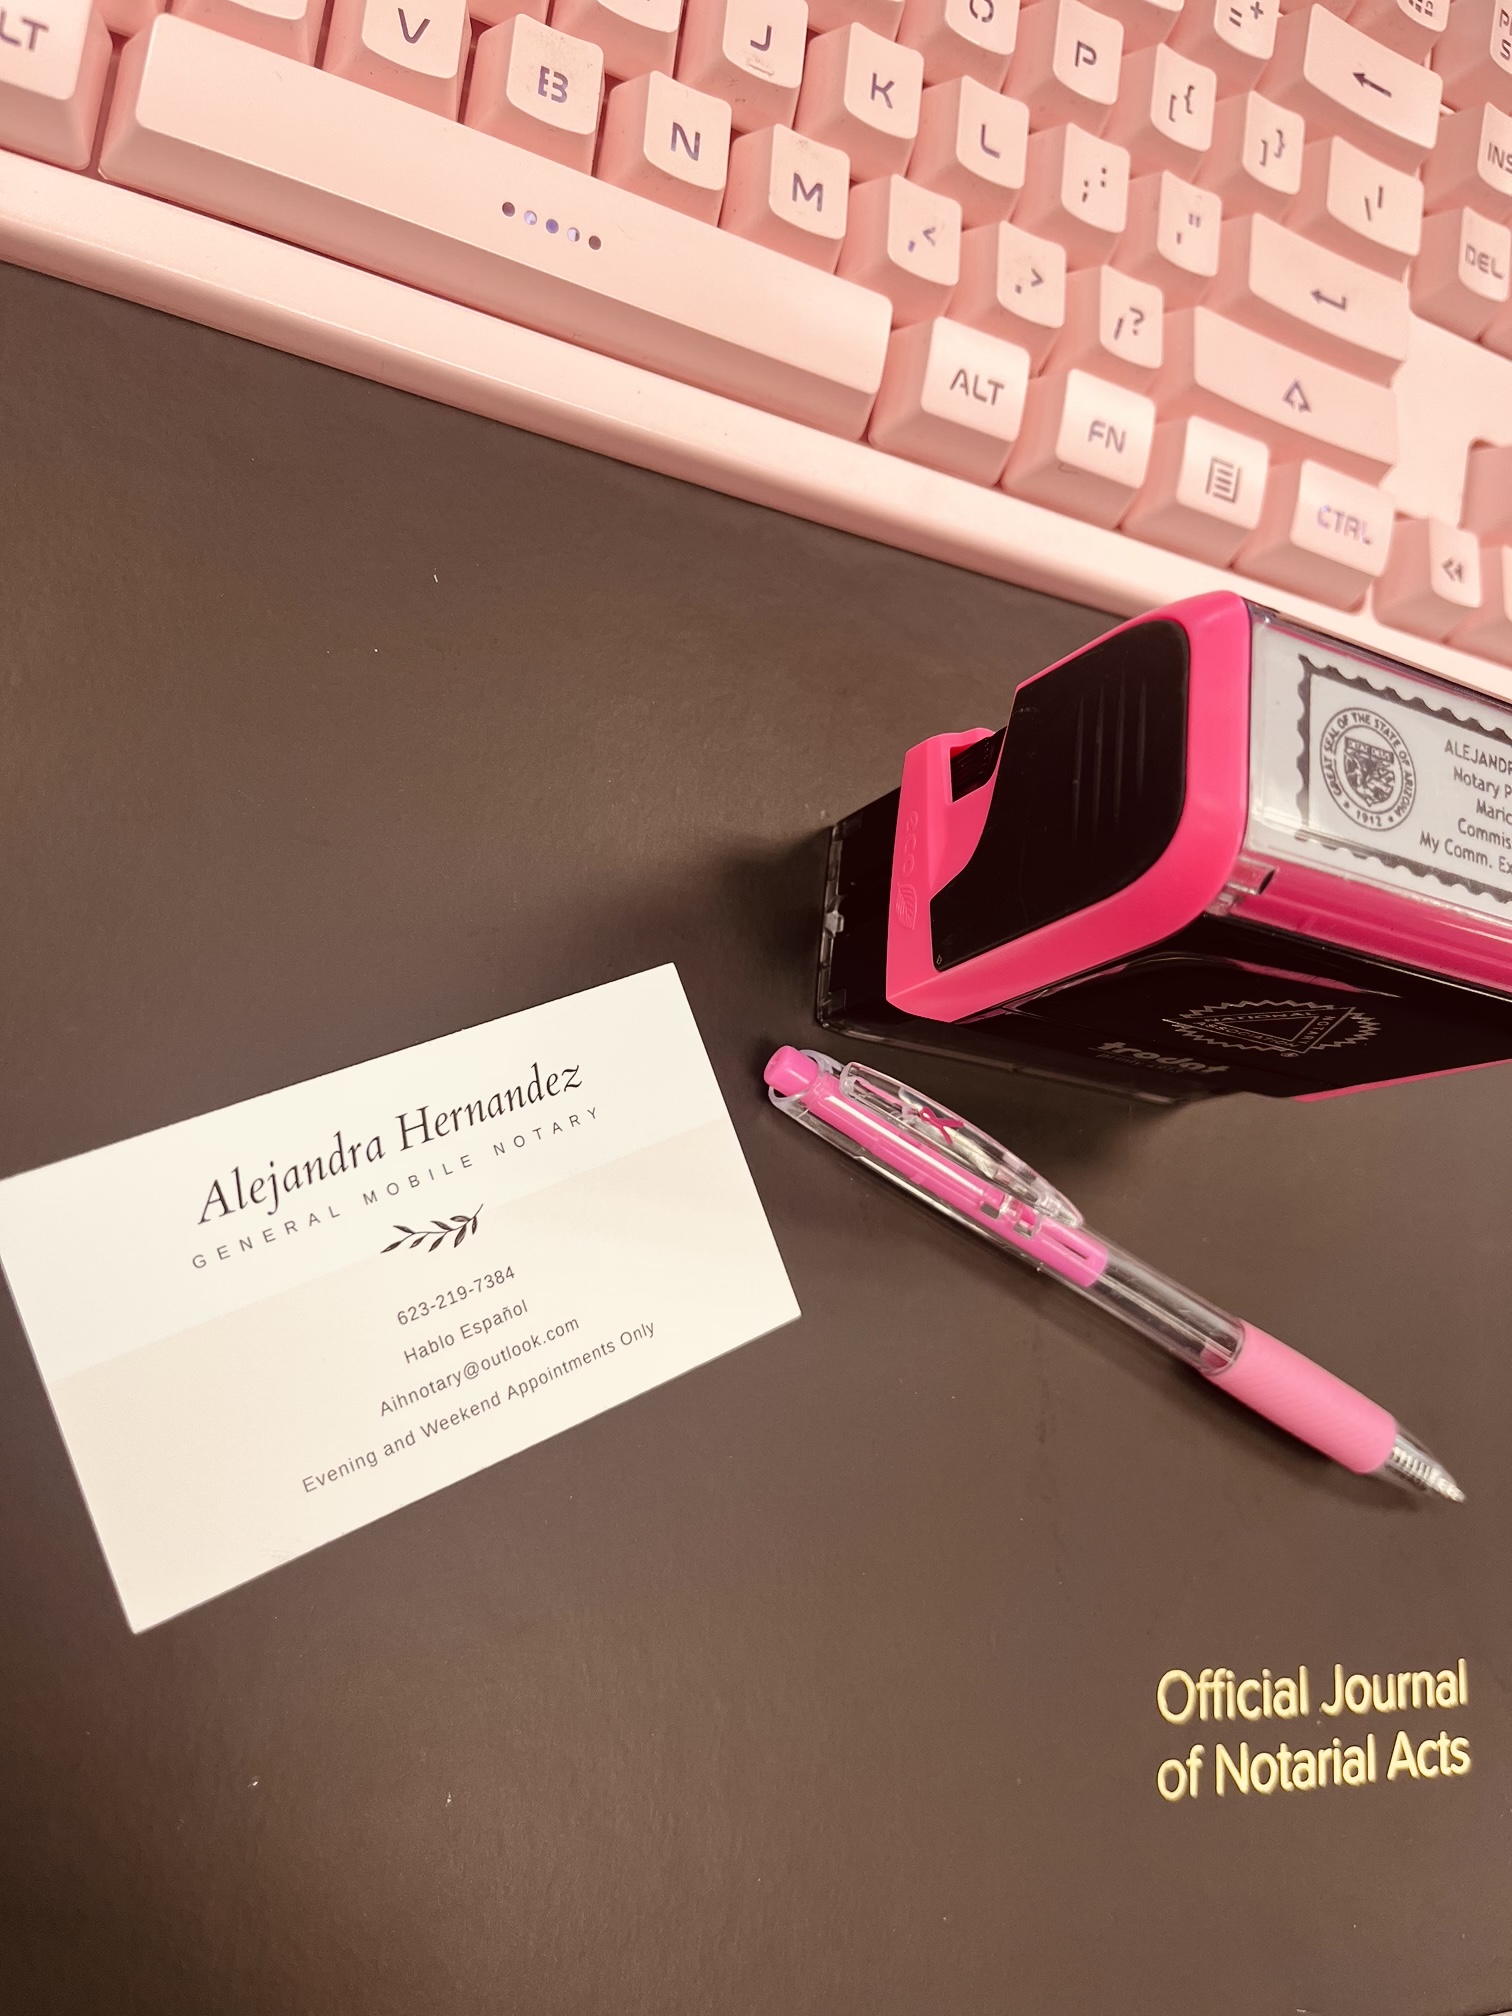 PHoto shows keyboard, pen, Notary stamp and a business card with the name Alejandra Hernandez on it.